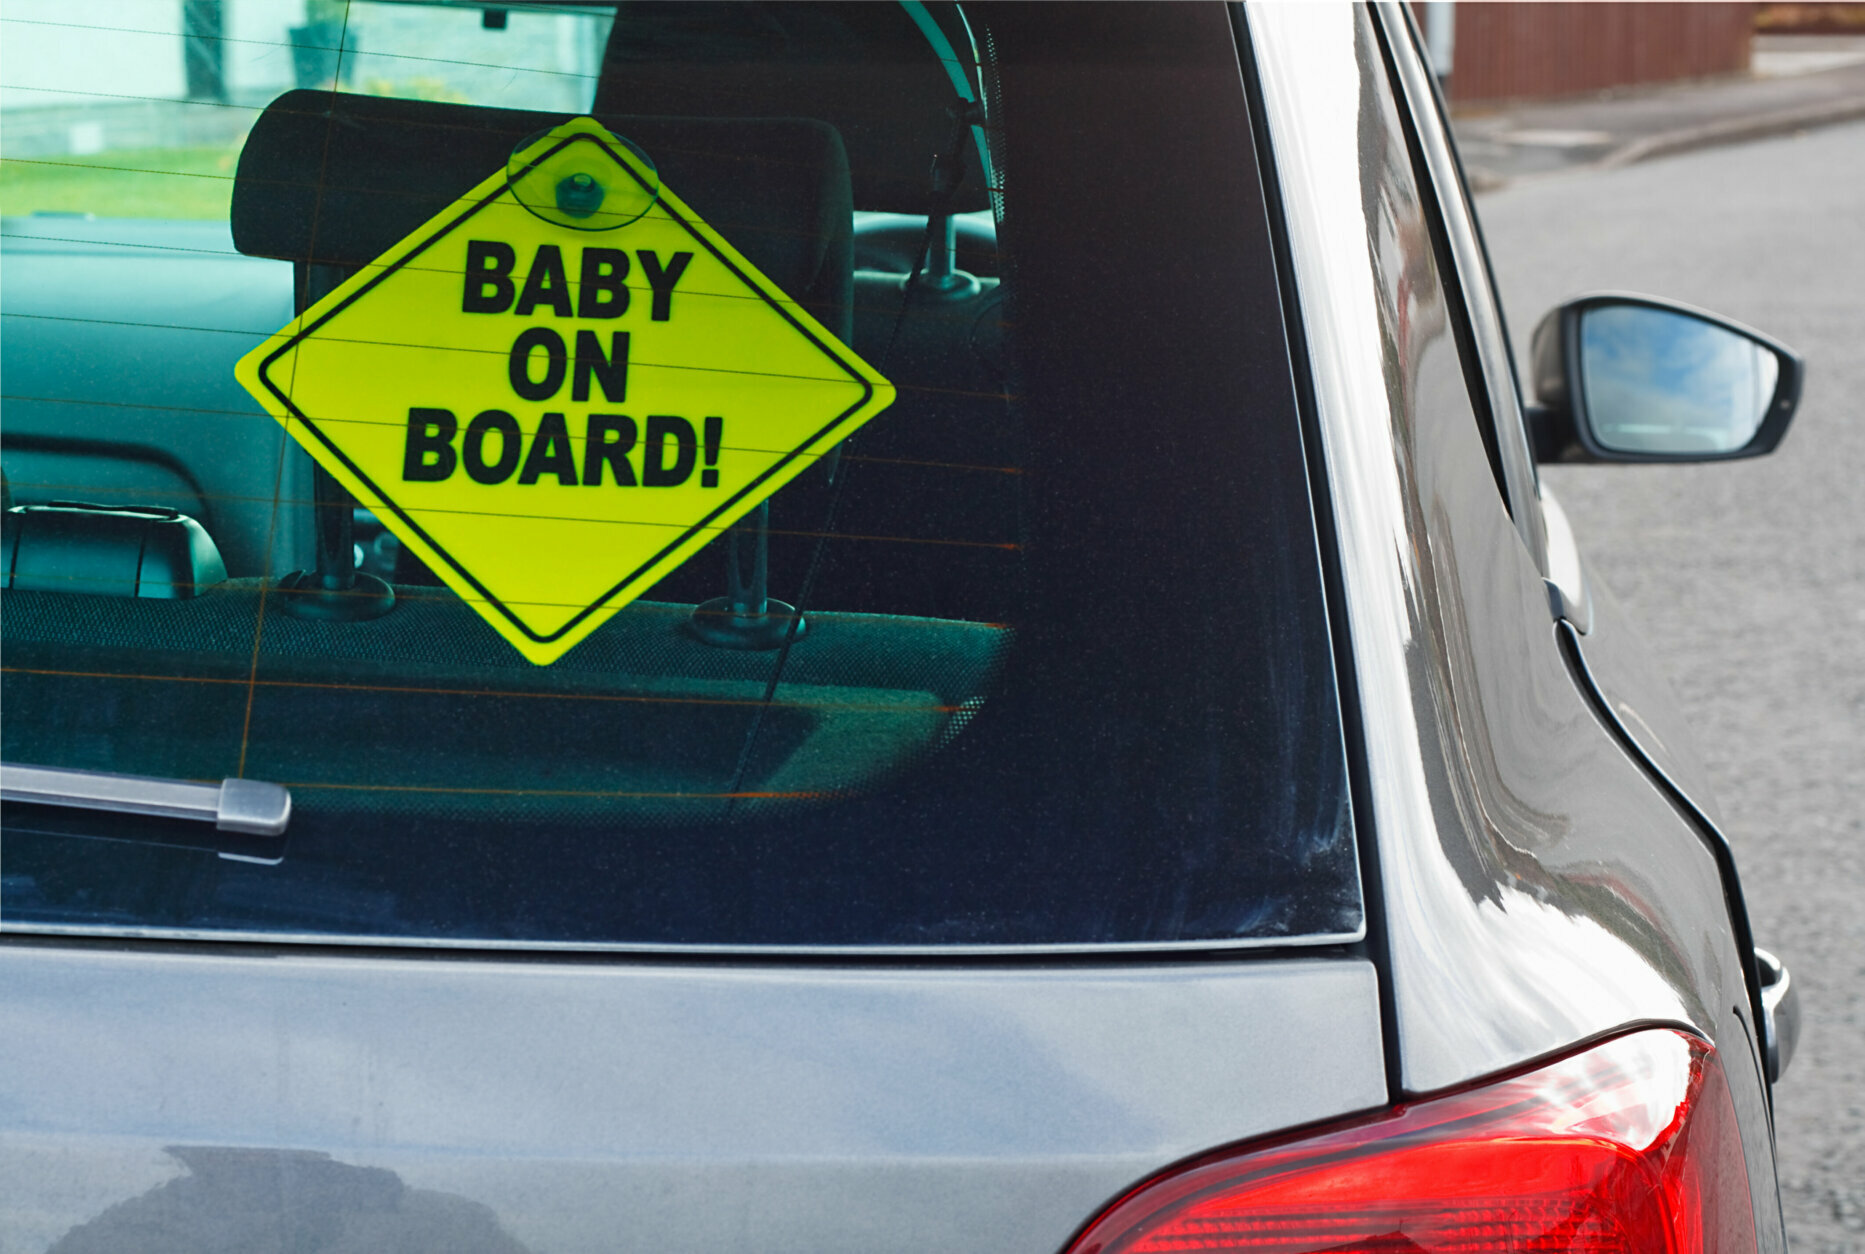 Baby on board warning sign in the back window of a car to advise cars behind of the presence of a toddler